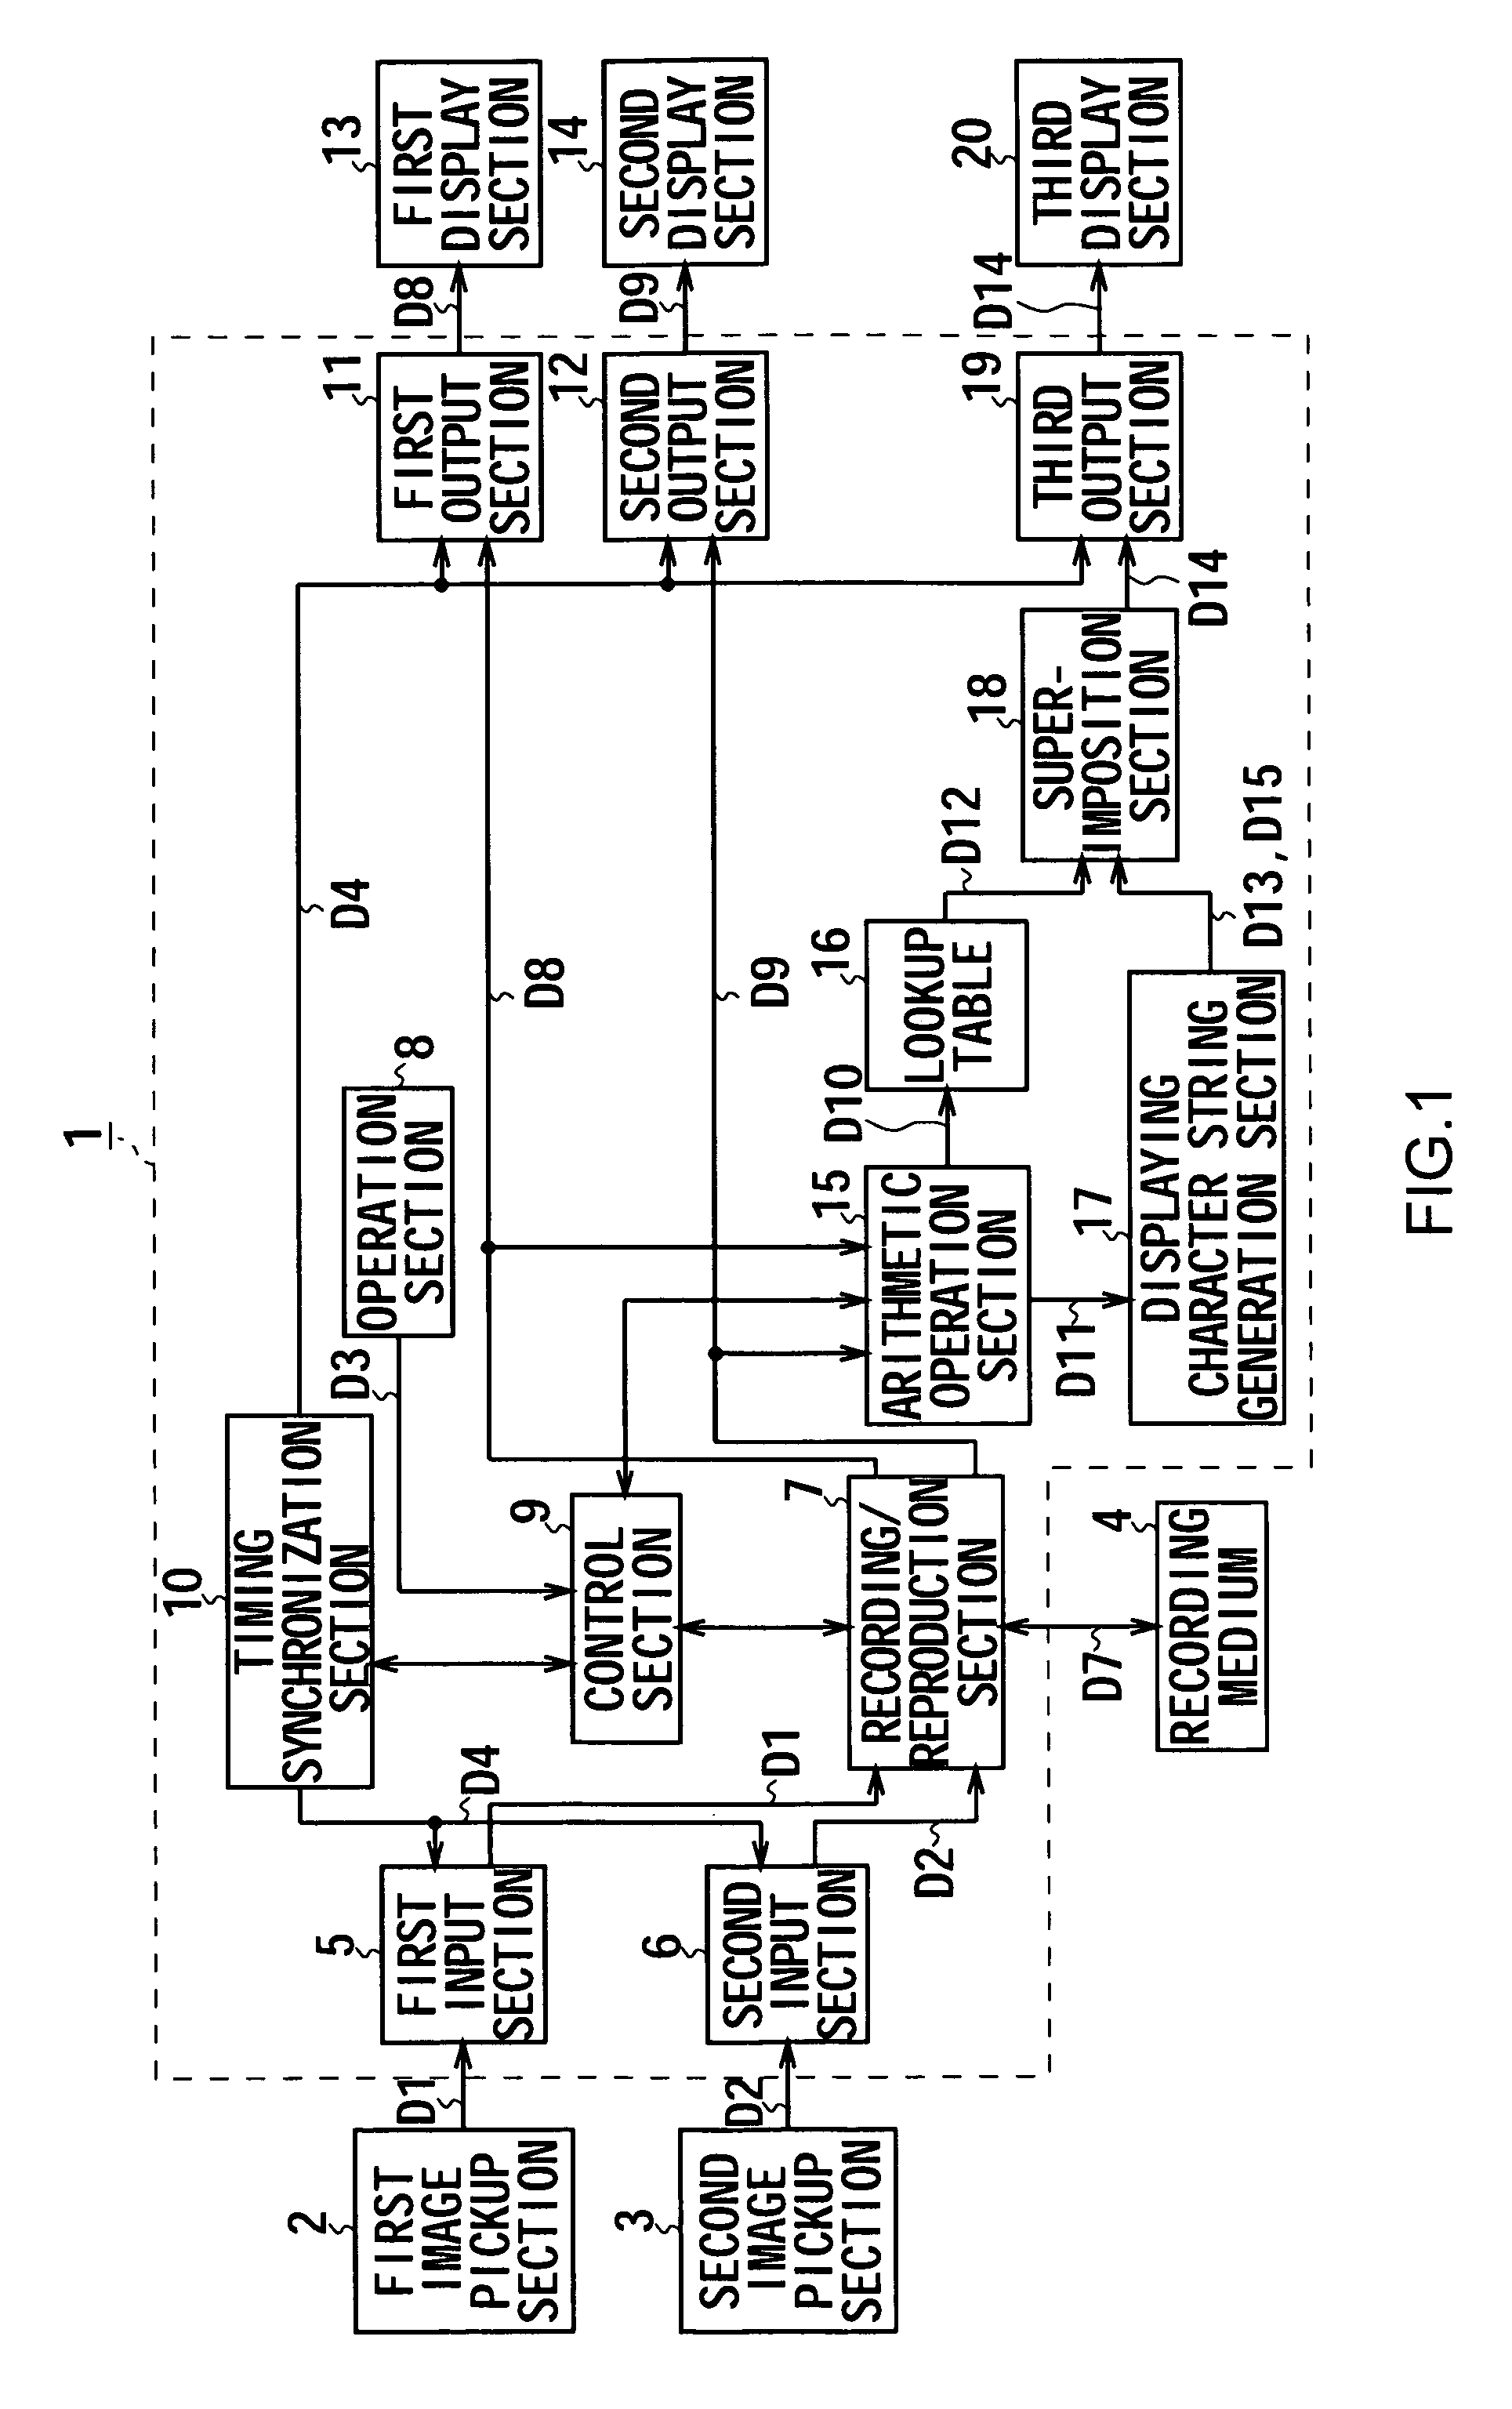 Recording/reproduction apparatus, and recording/reproduction method as well as stereoscopic image visual effects confirmation apparatus and stereoscopic image visual effects confirmation method